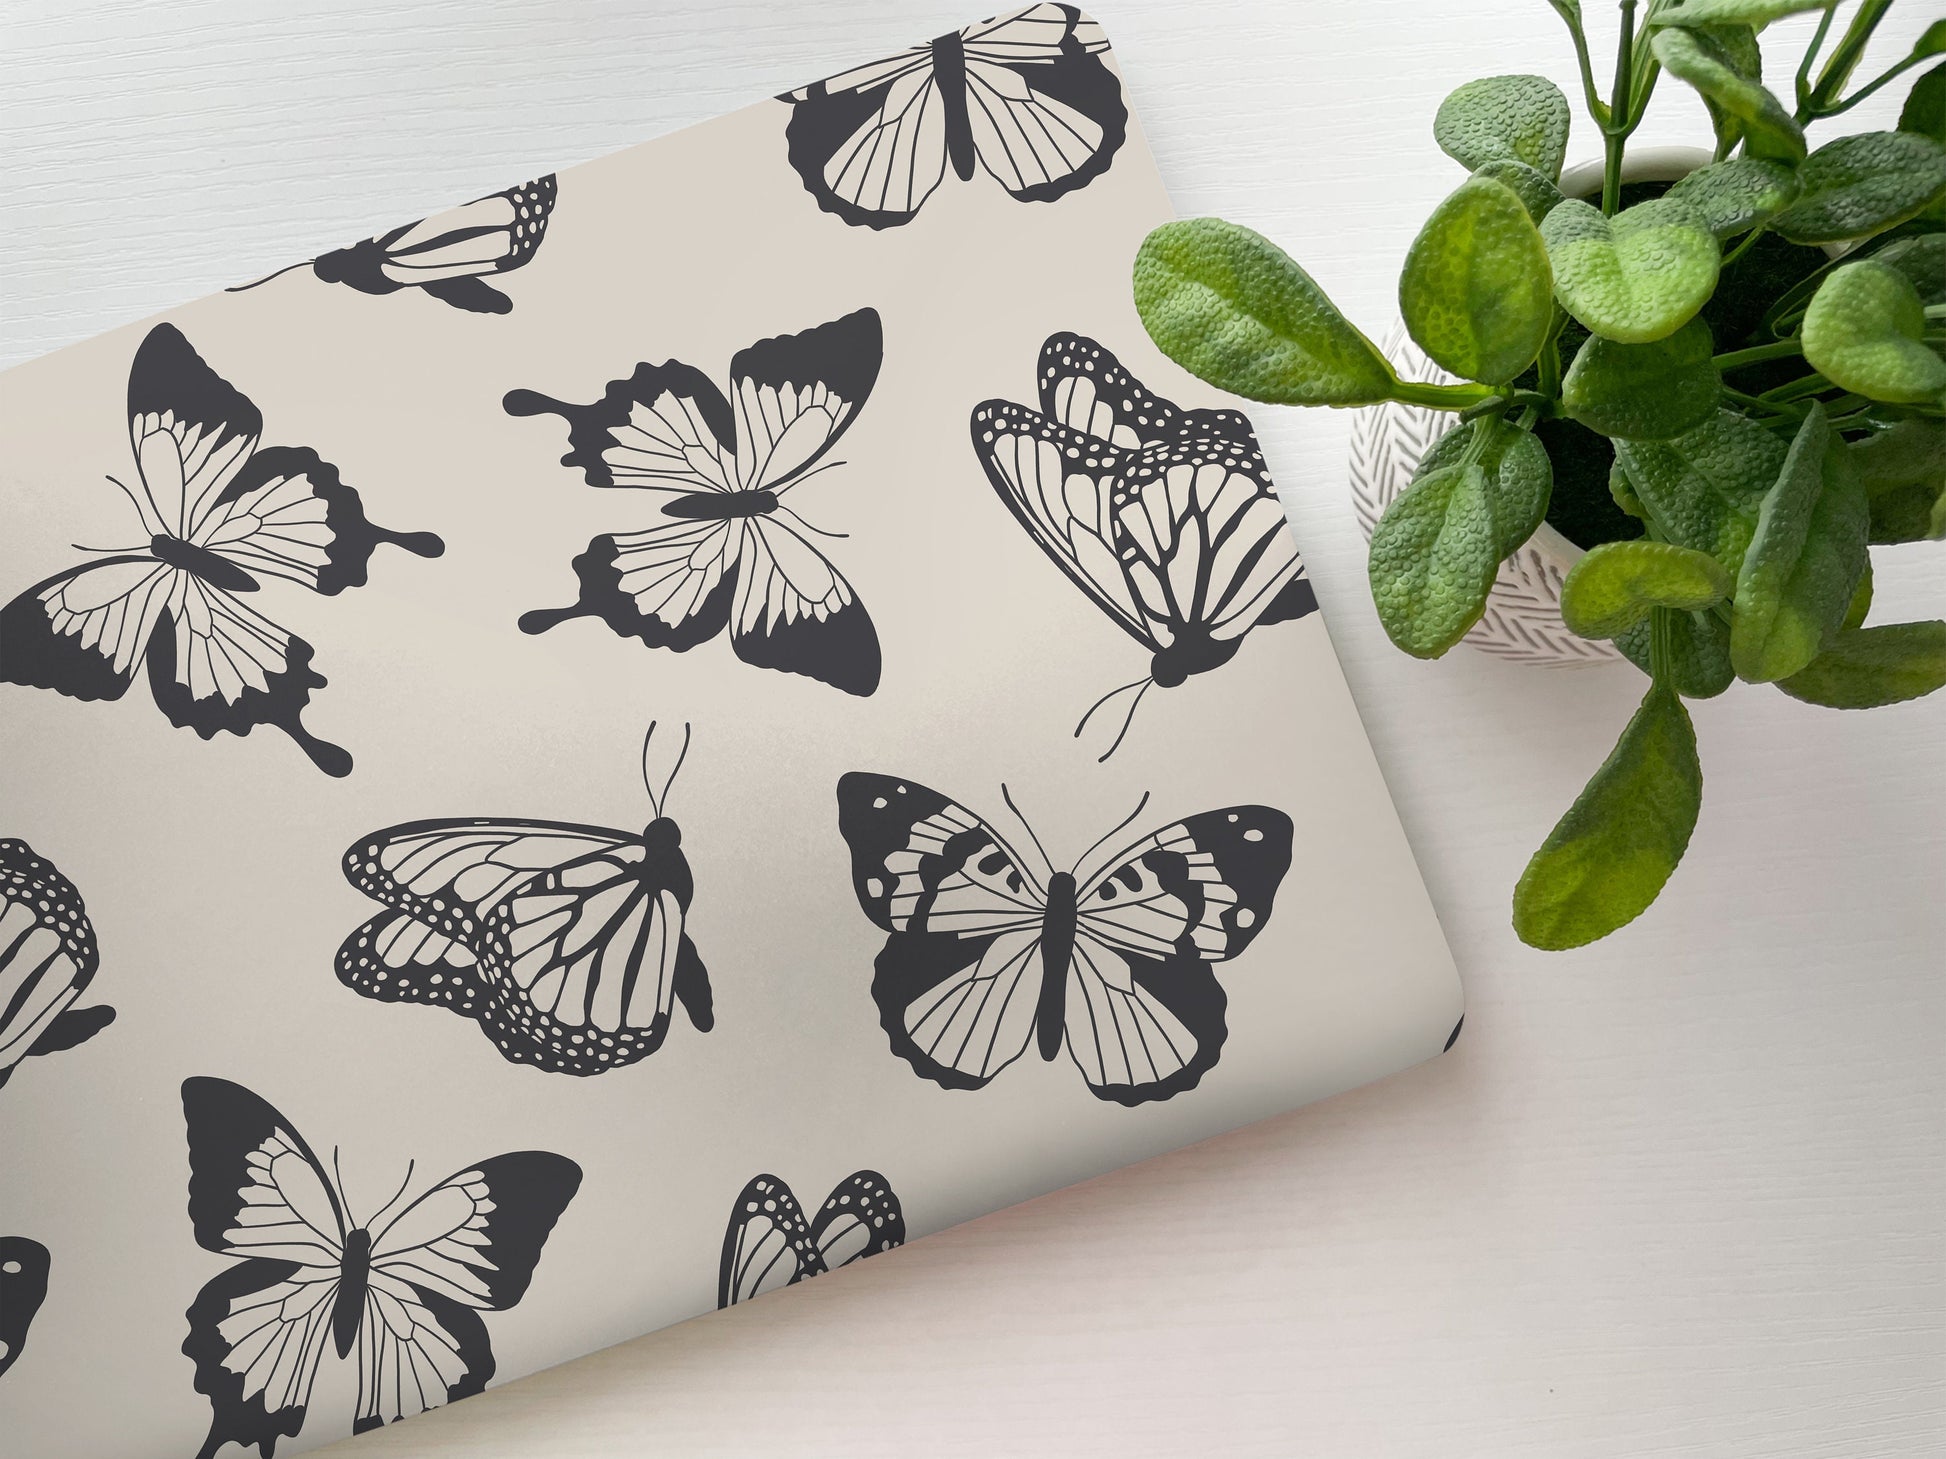 Black Butterfly Laptop Skin, Laptop Cover, Laptop Skins, Removable Laptop Skins, Laptop Decal, Customized Laptop Full Coverage Stickers, 16 - James & Inks